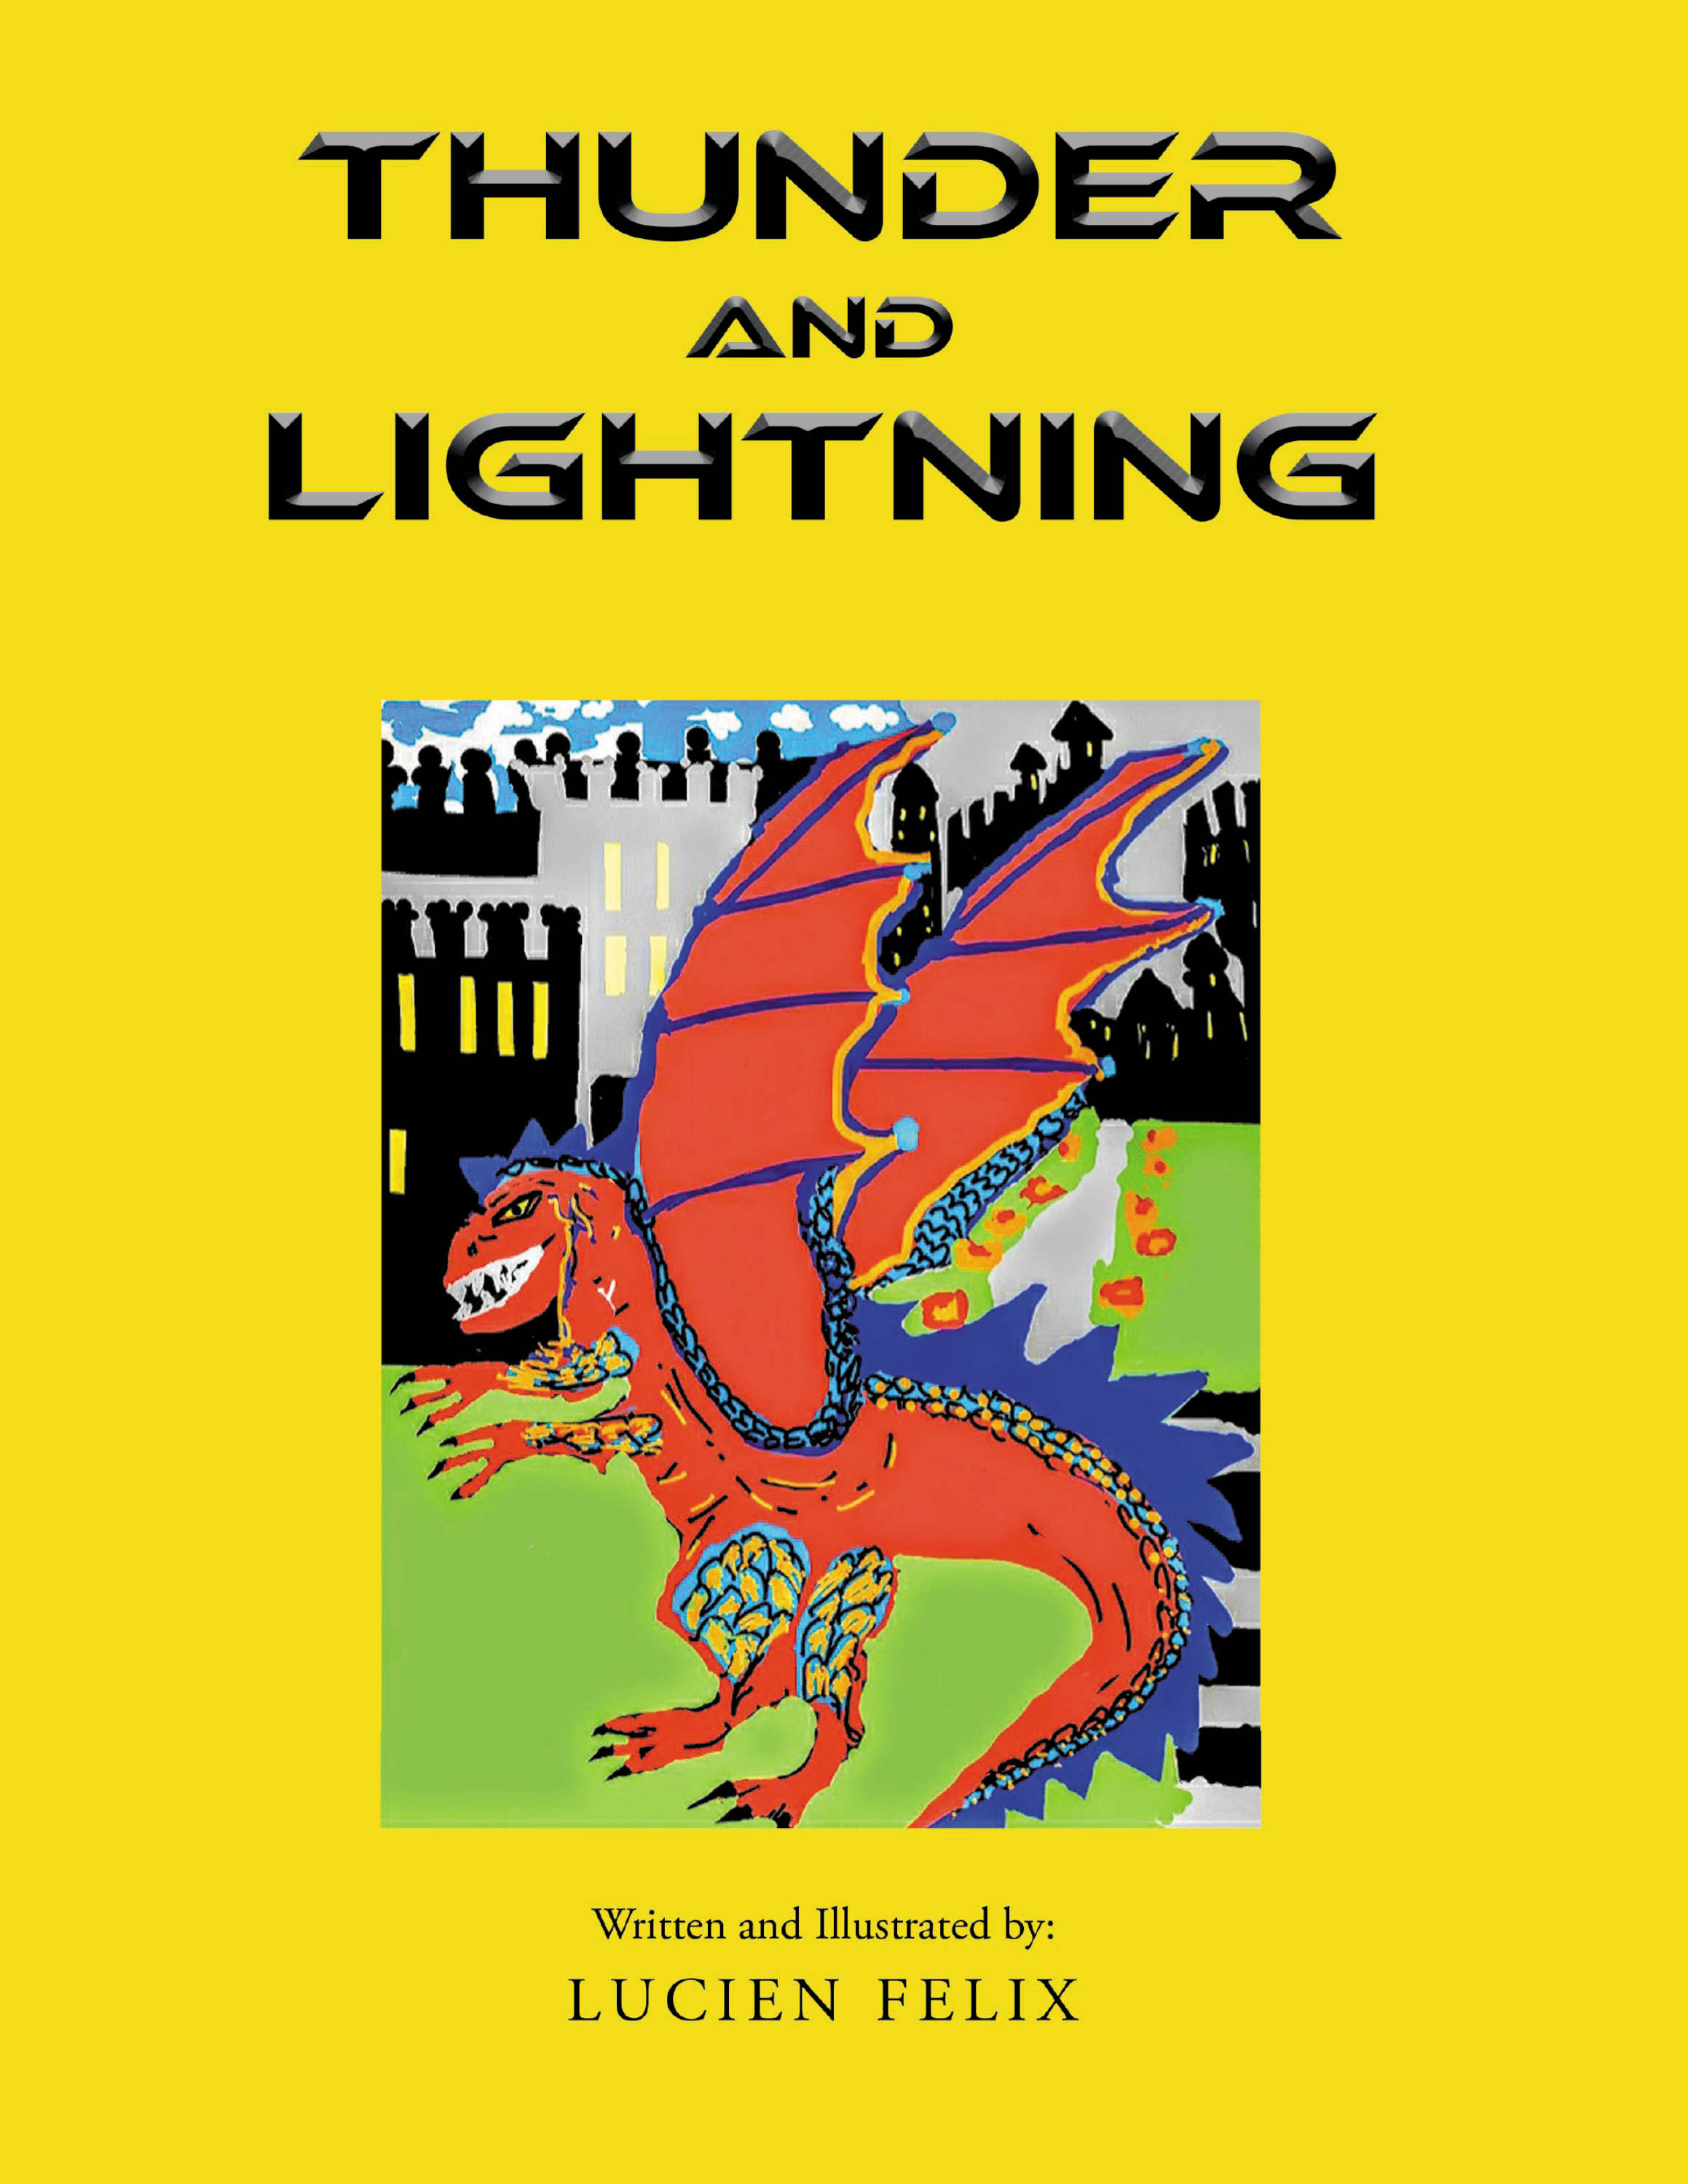 Lucien Felix’s New Book, "Thunder and Lightning," is a Creative Children’s Fantasy Story That Explains the Magical Origins of Well-Known Weather Phenomena